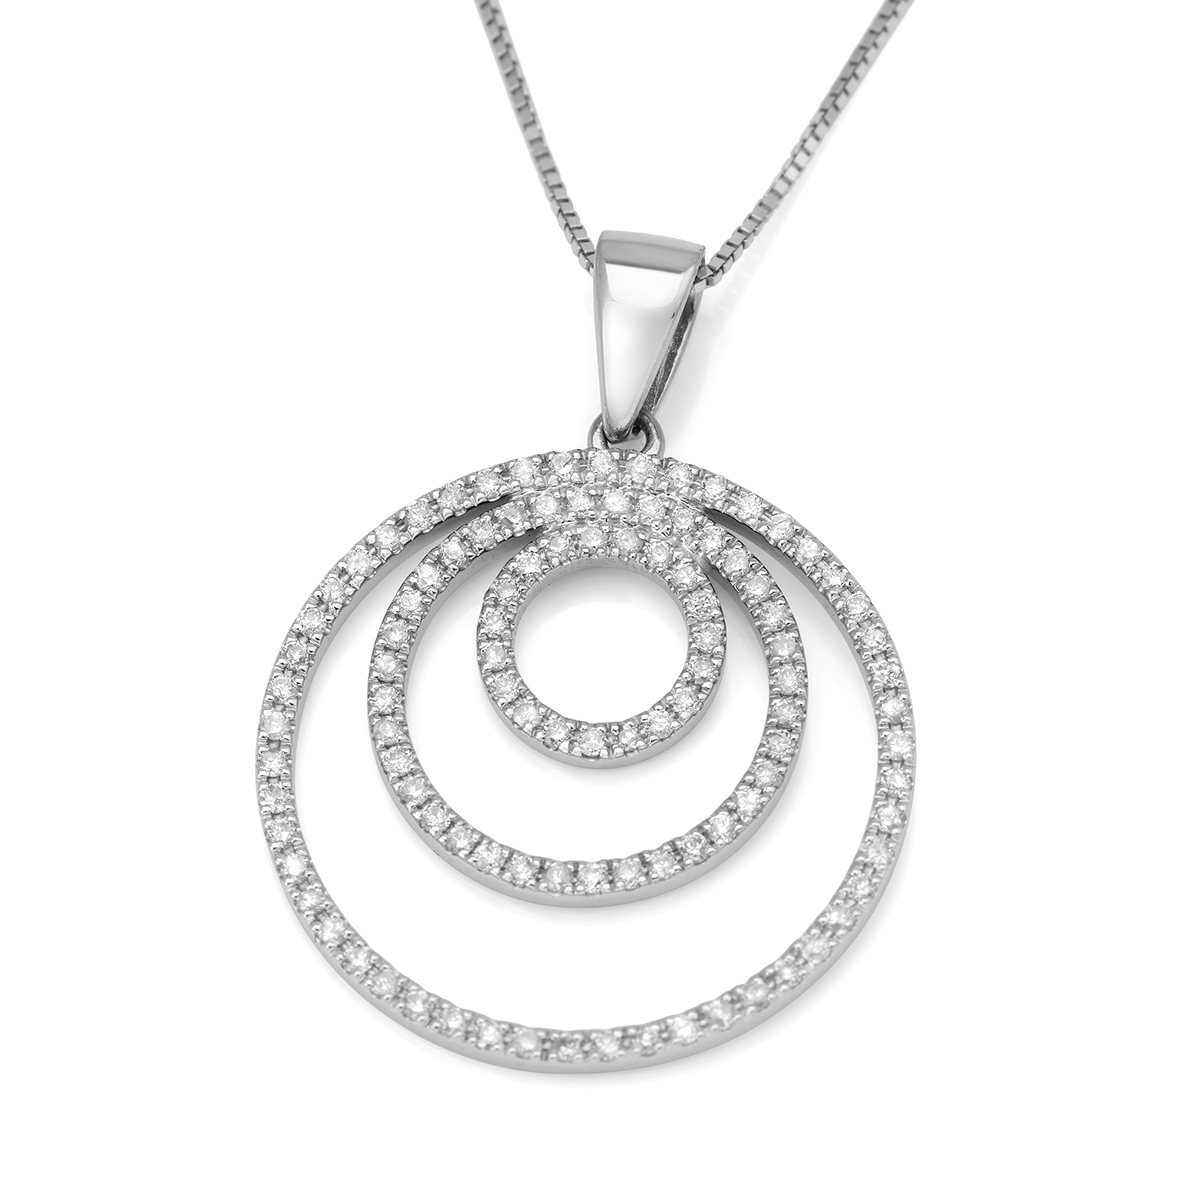 Diamond-Accented Circles 14K White Gold Pendant Necklace - 1